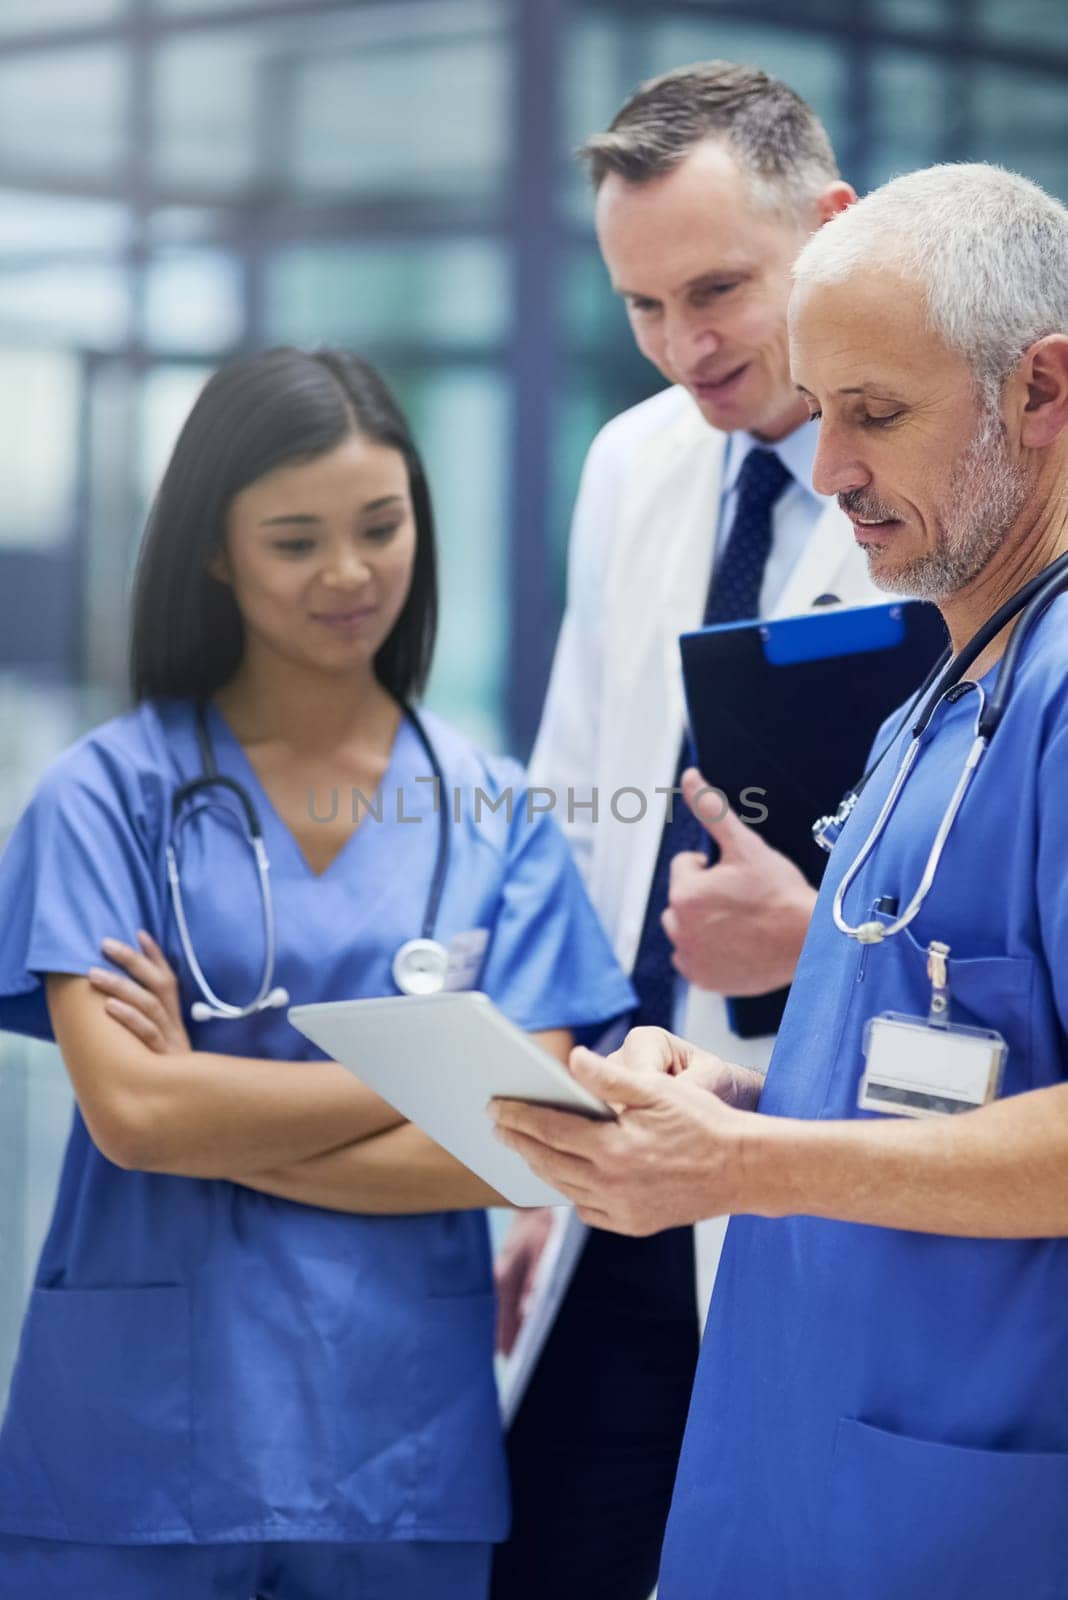 Shot of a group of doctors talking together over a digital tablet while standing in a hospital.